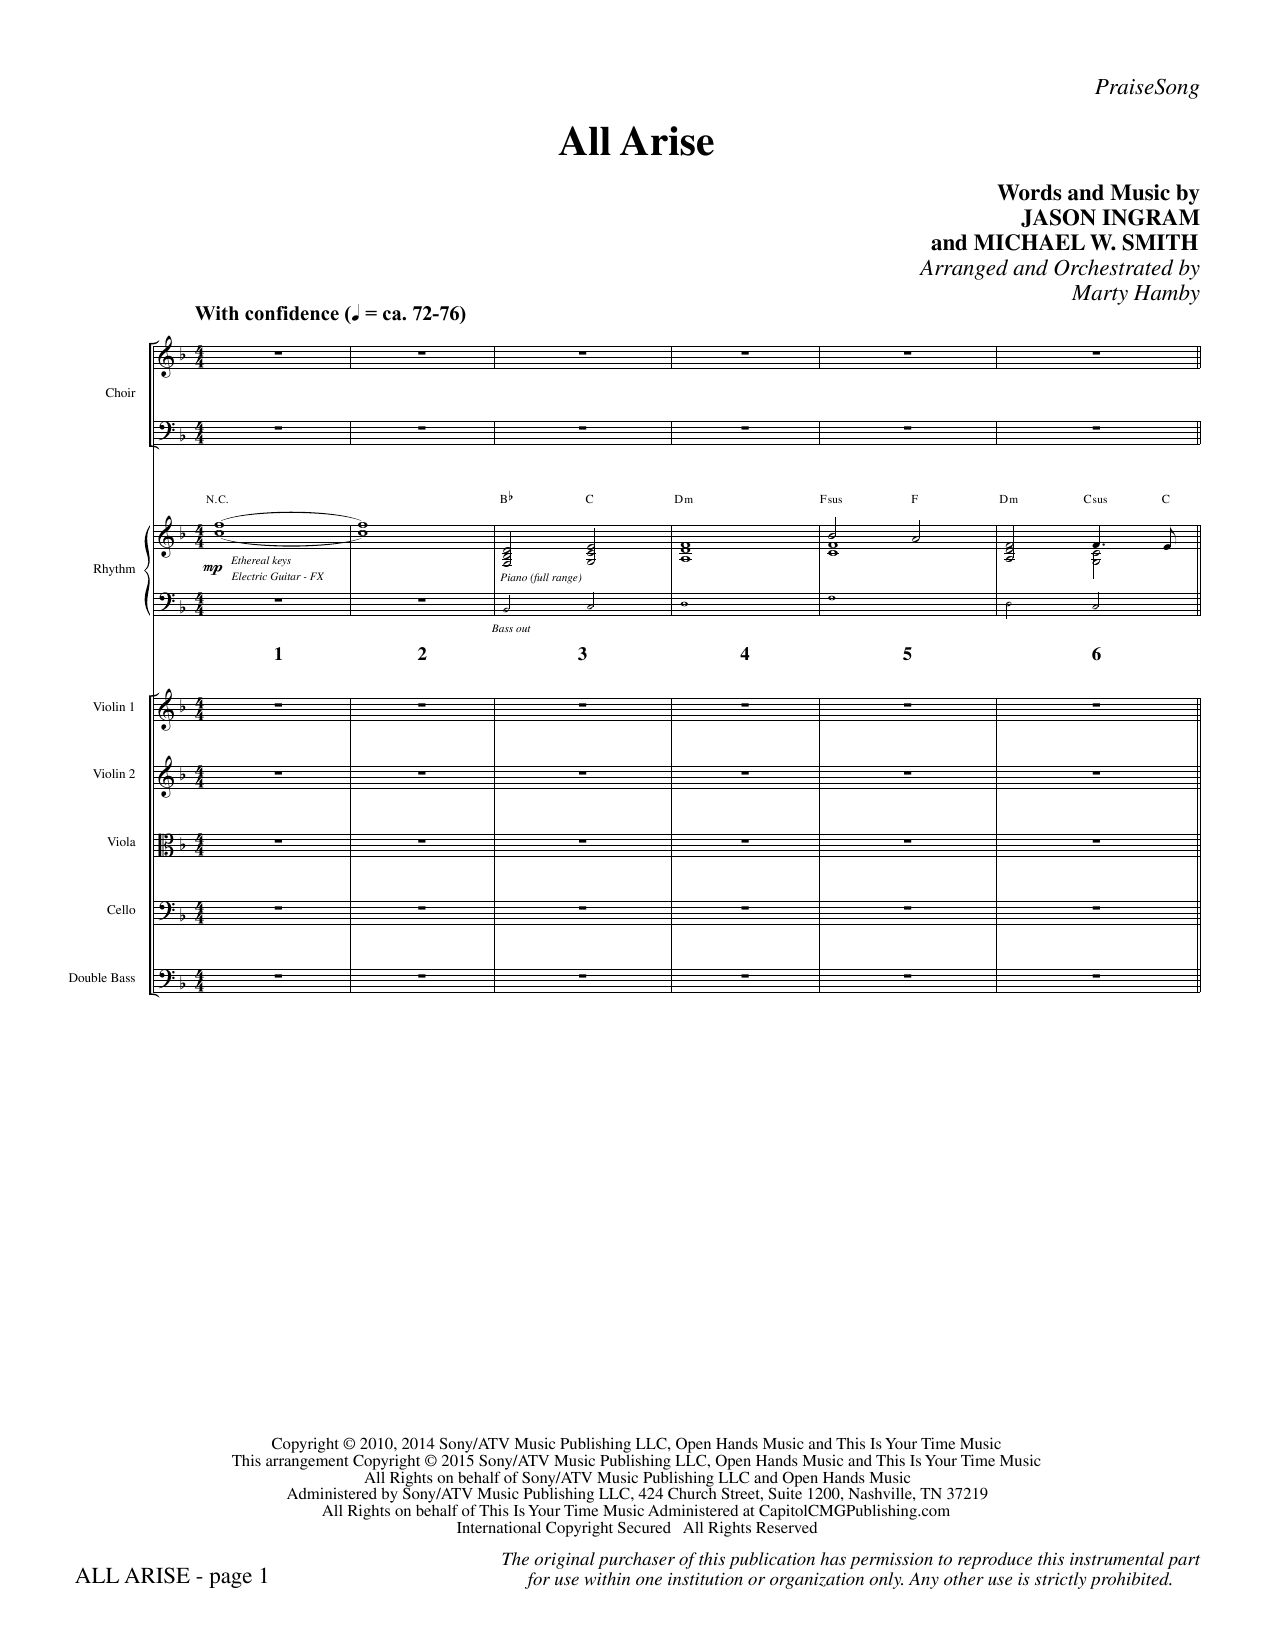 Marty Hamby All Arise - Full Score sheet music notes and chords. Download Printable PDF.